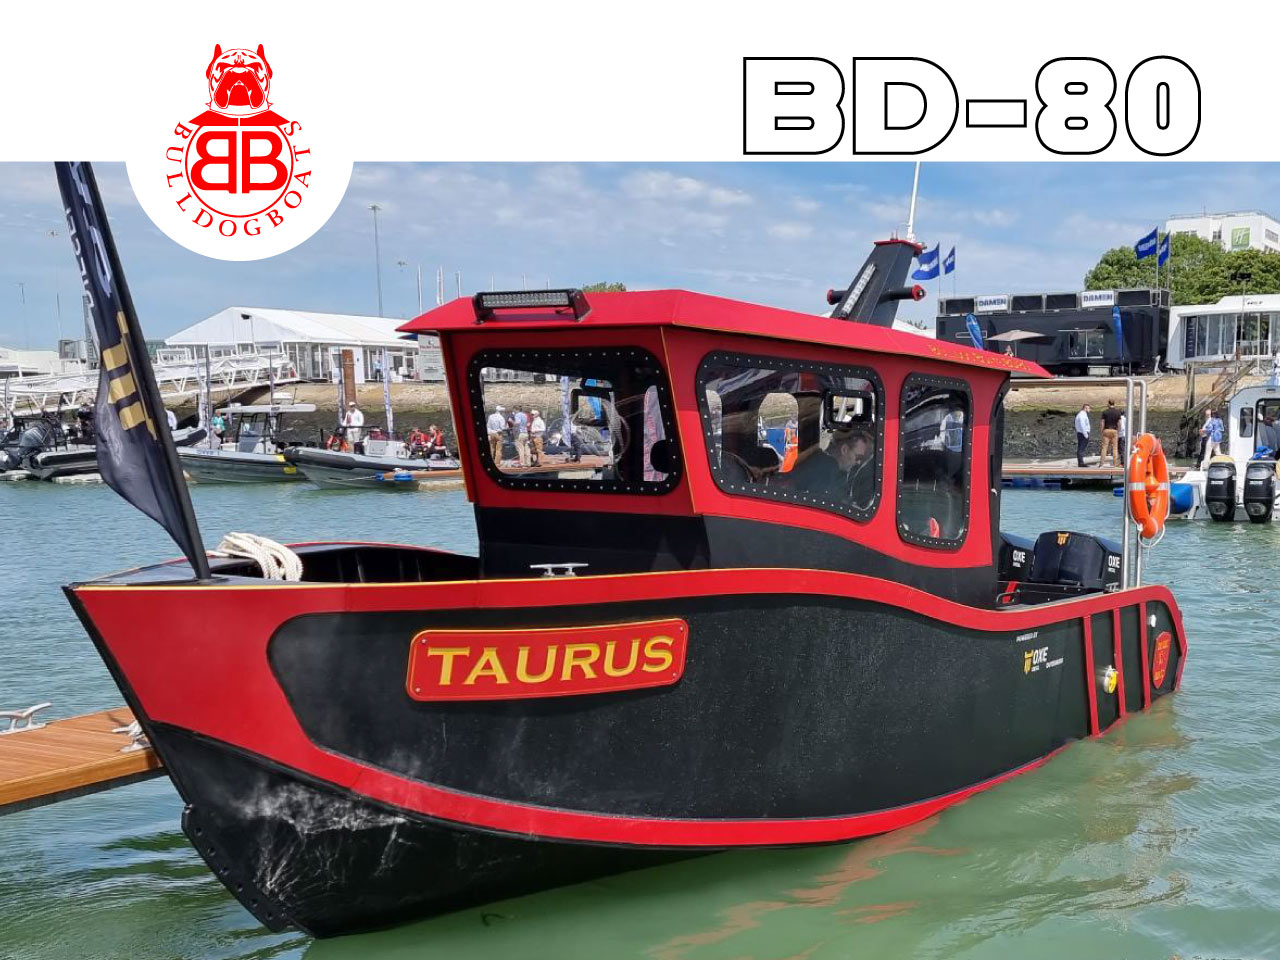 Bulldog Boats BD-80 With OXE Outboard Engines Available From Farndon Marina